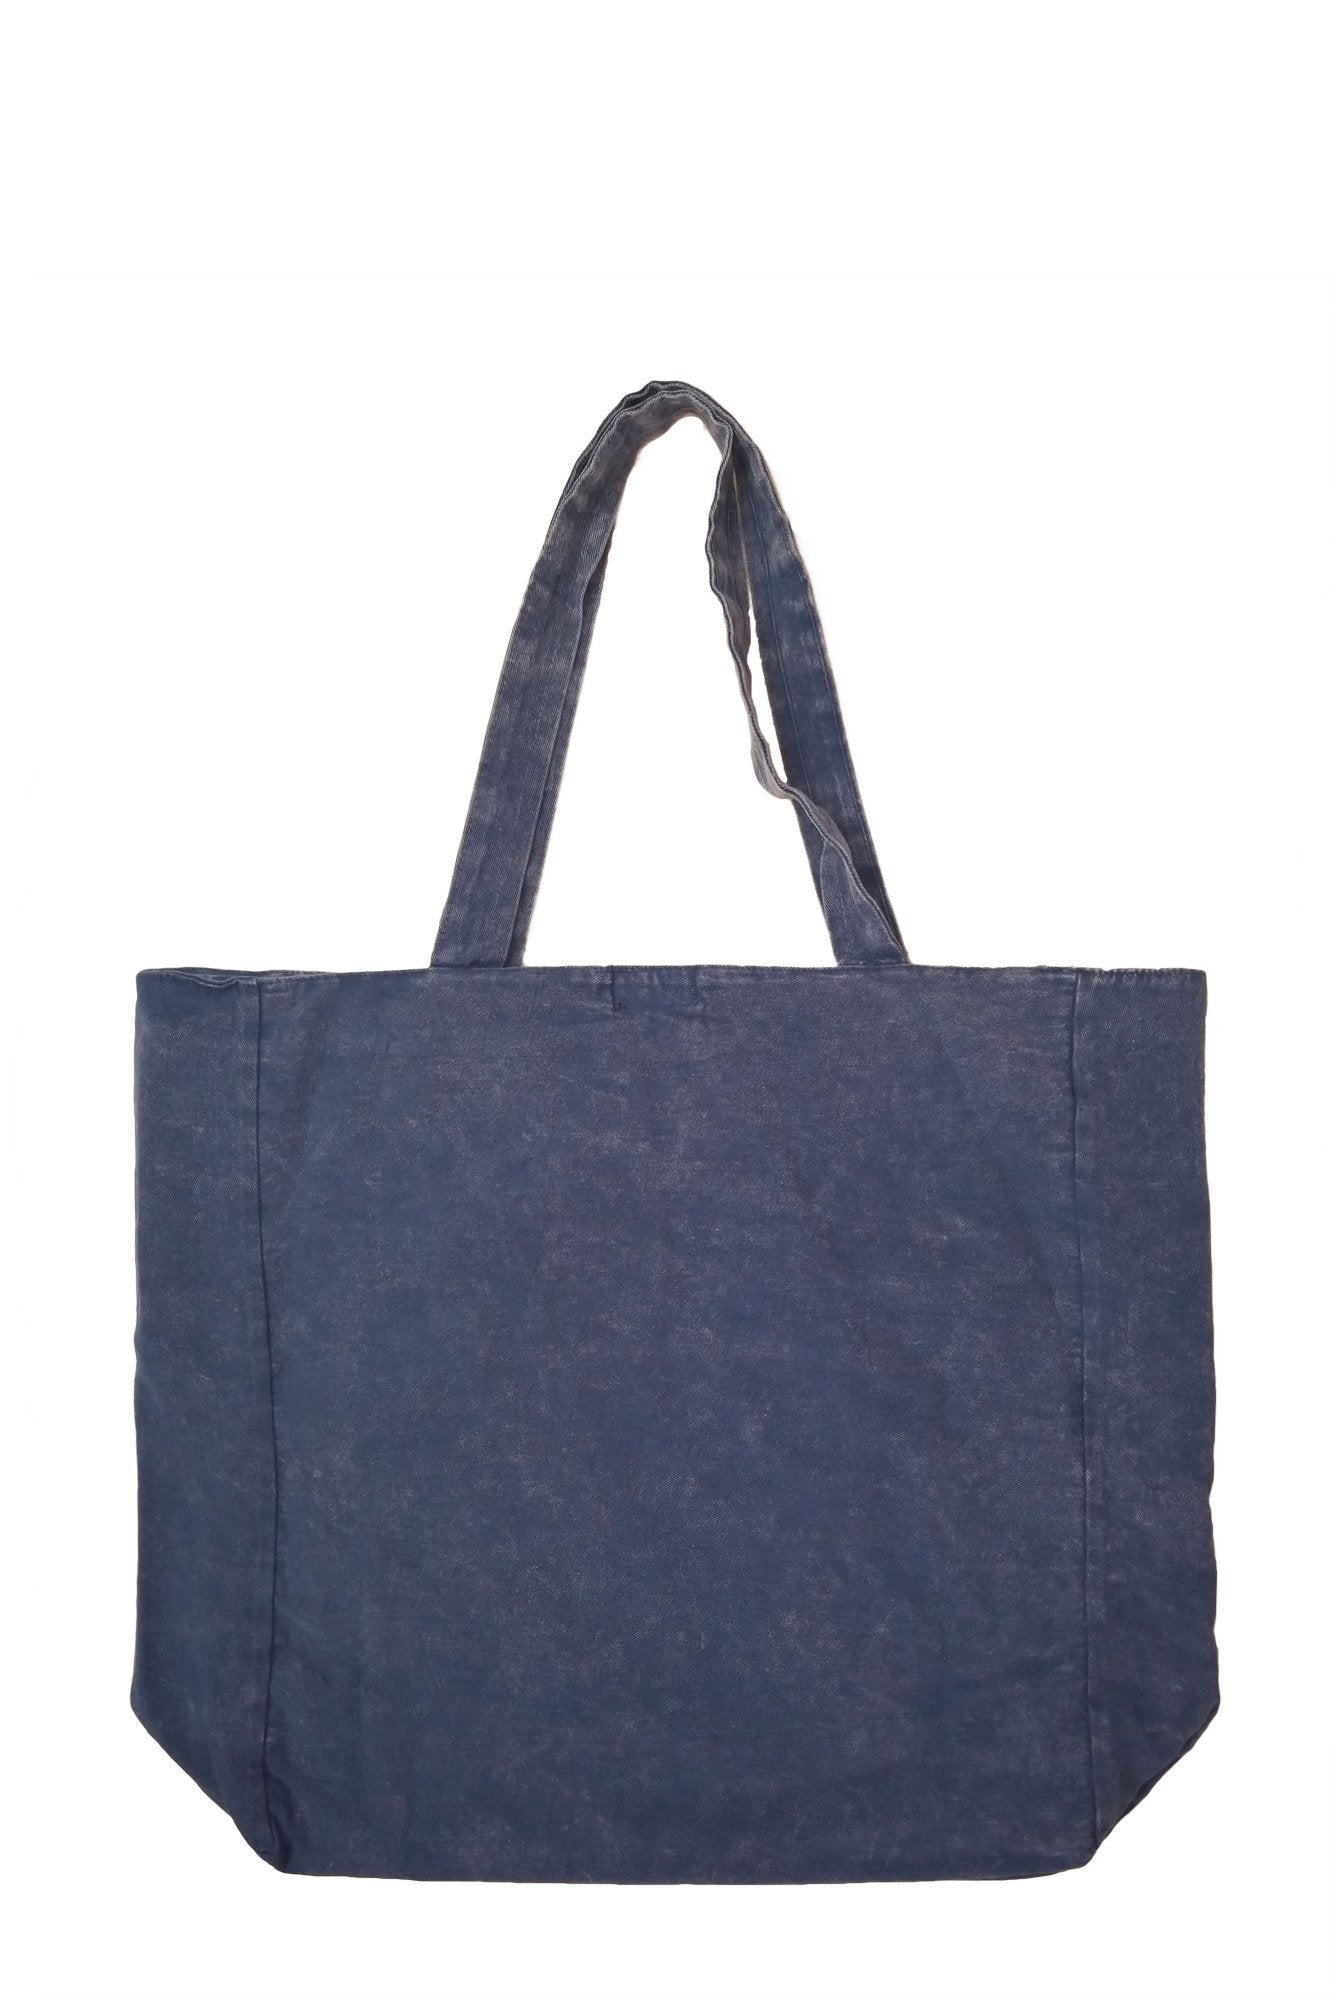 authentic blue denim look casual shoulder bag with embroidery - Breakmood